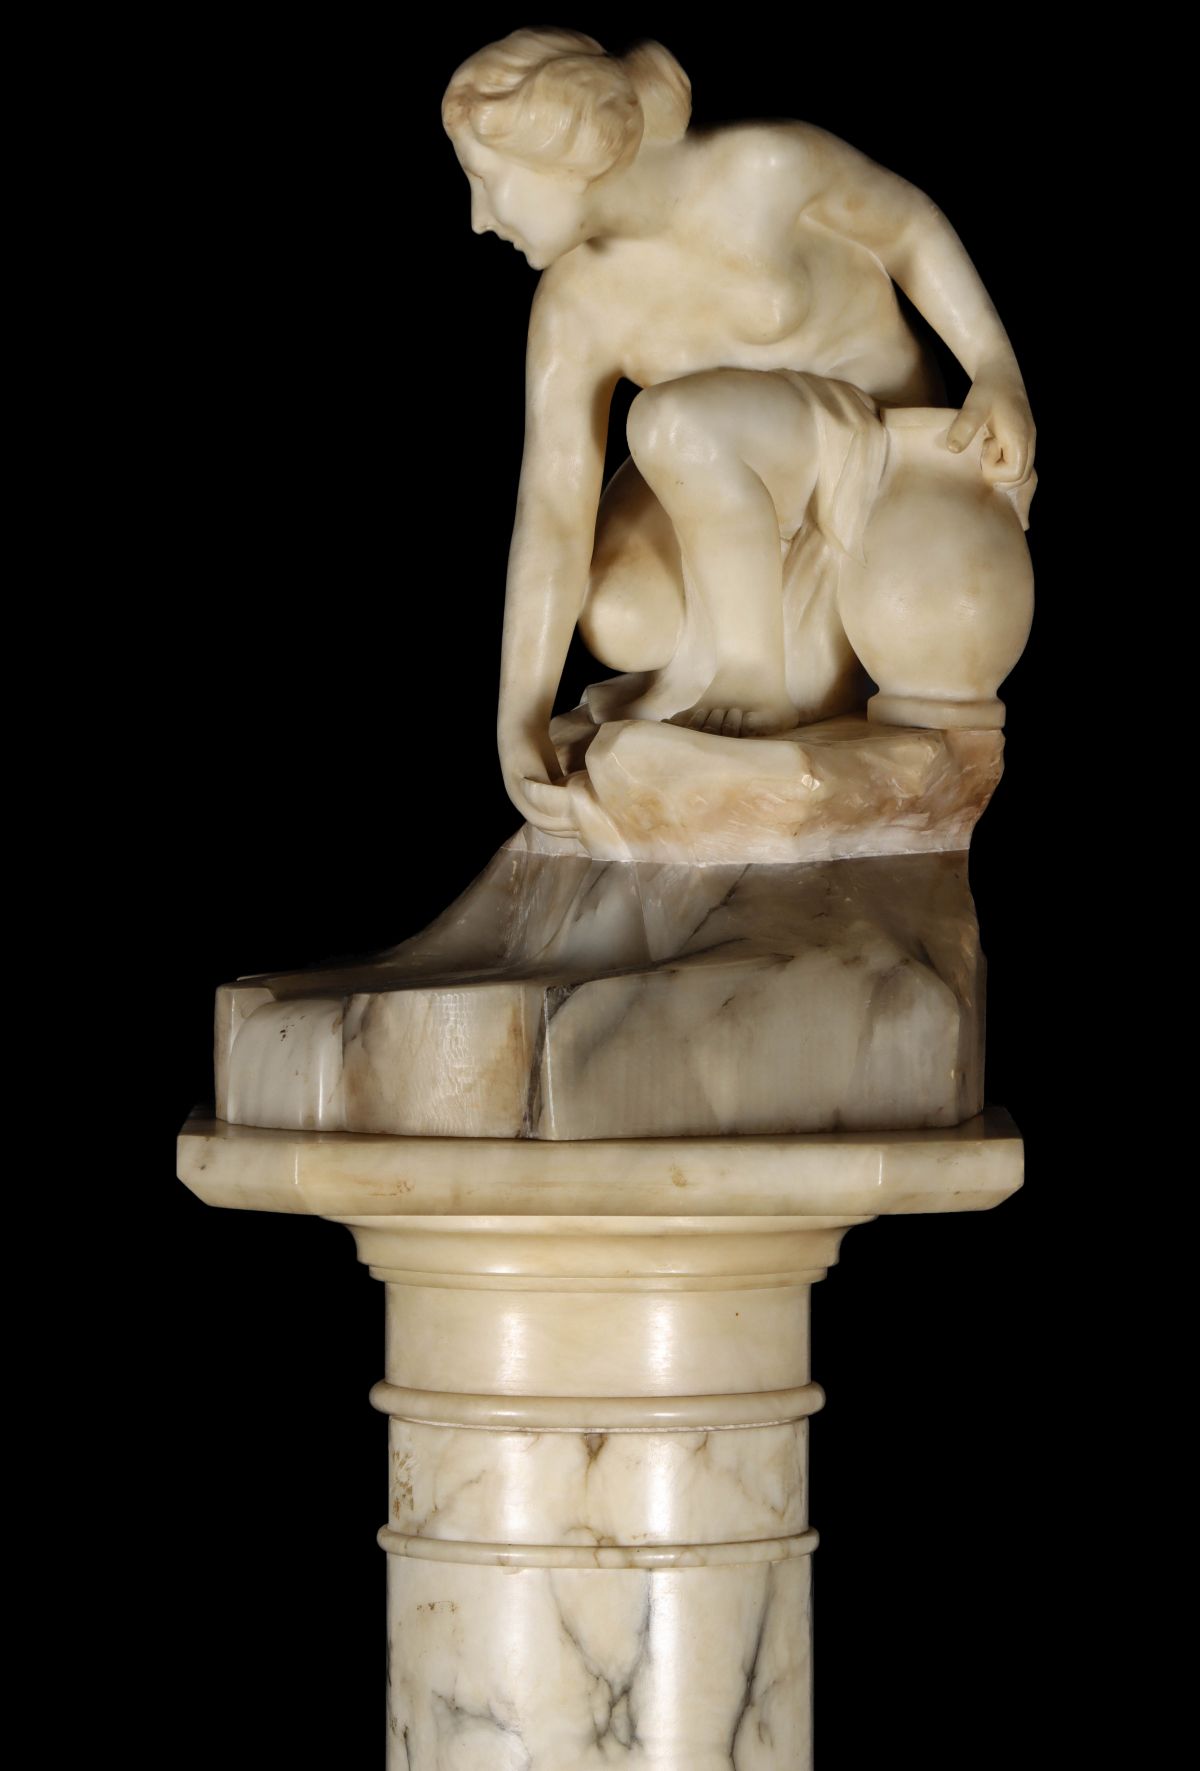 AN ITALIAN NUDE BATHER MARBLE SCULPTURE WITH PEDESTAL